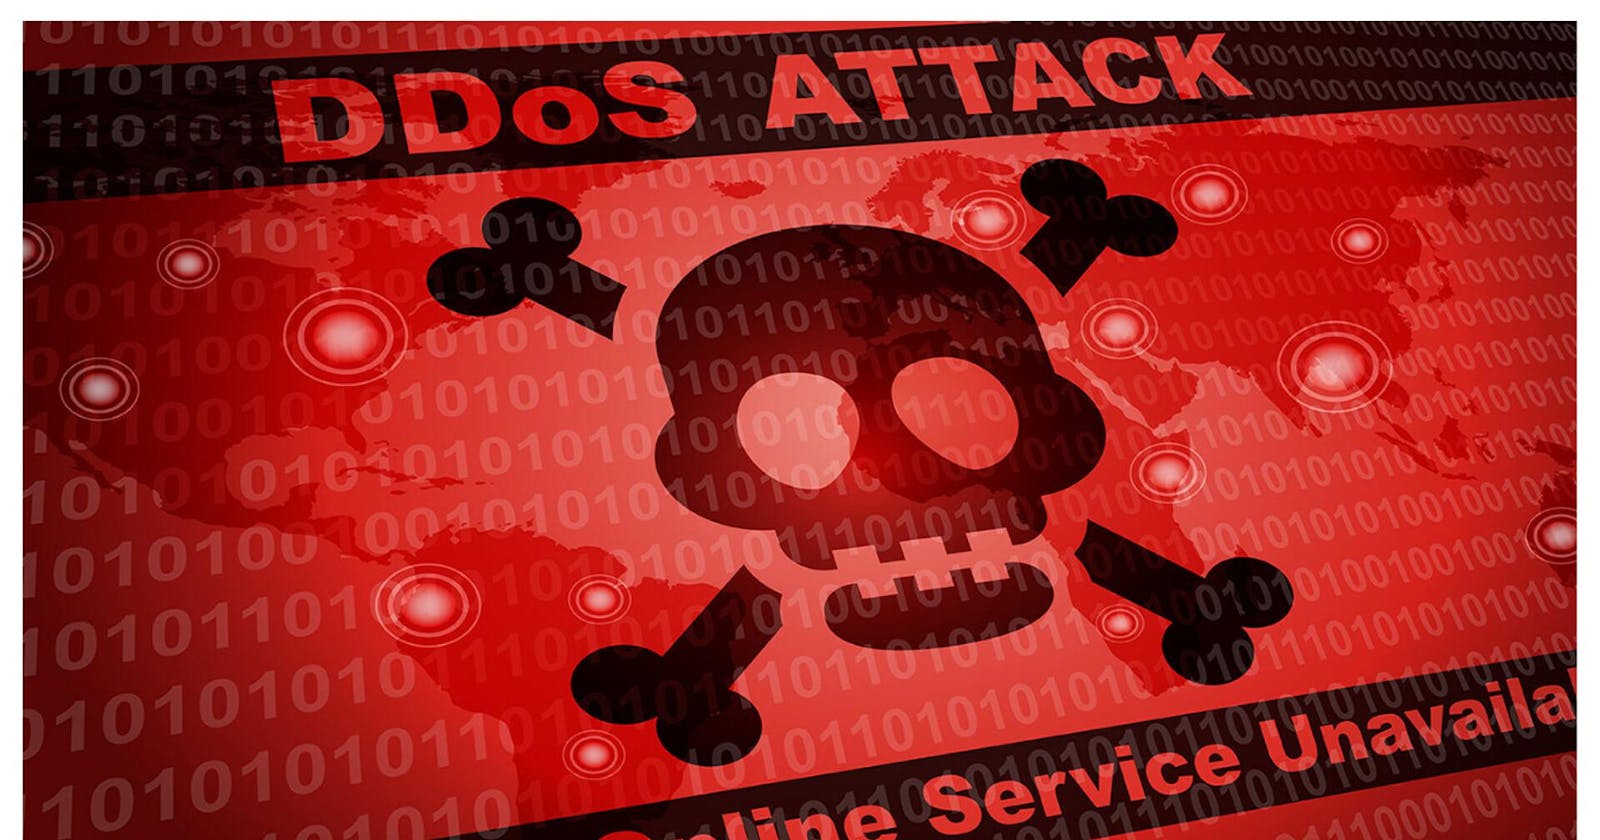 DDOS attack using GoldenEye in Kali Linux and Termux.